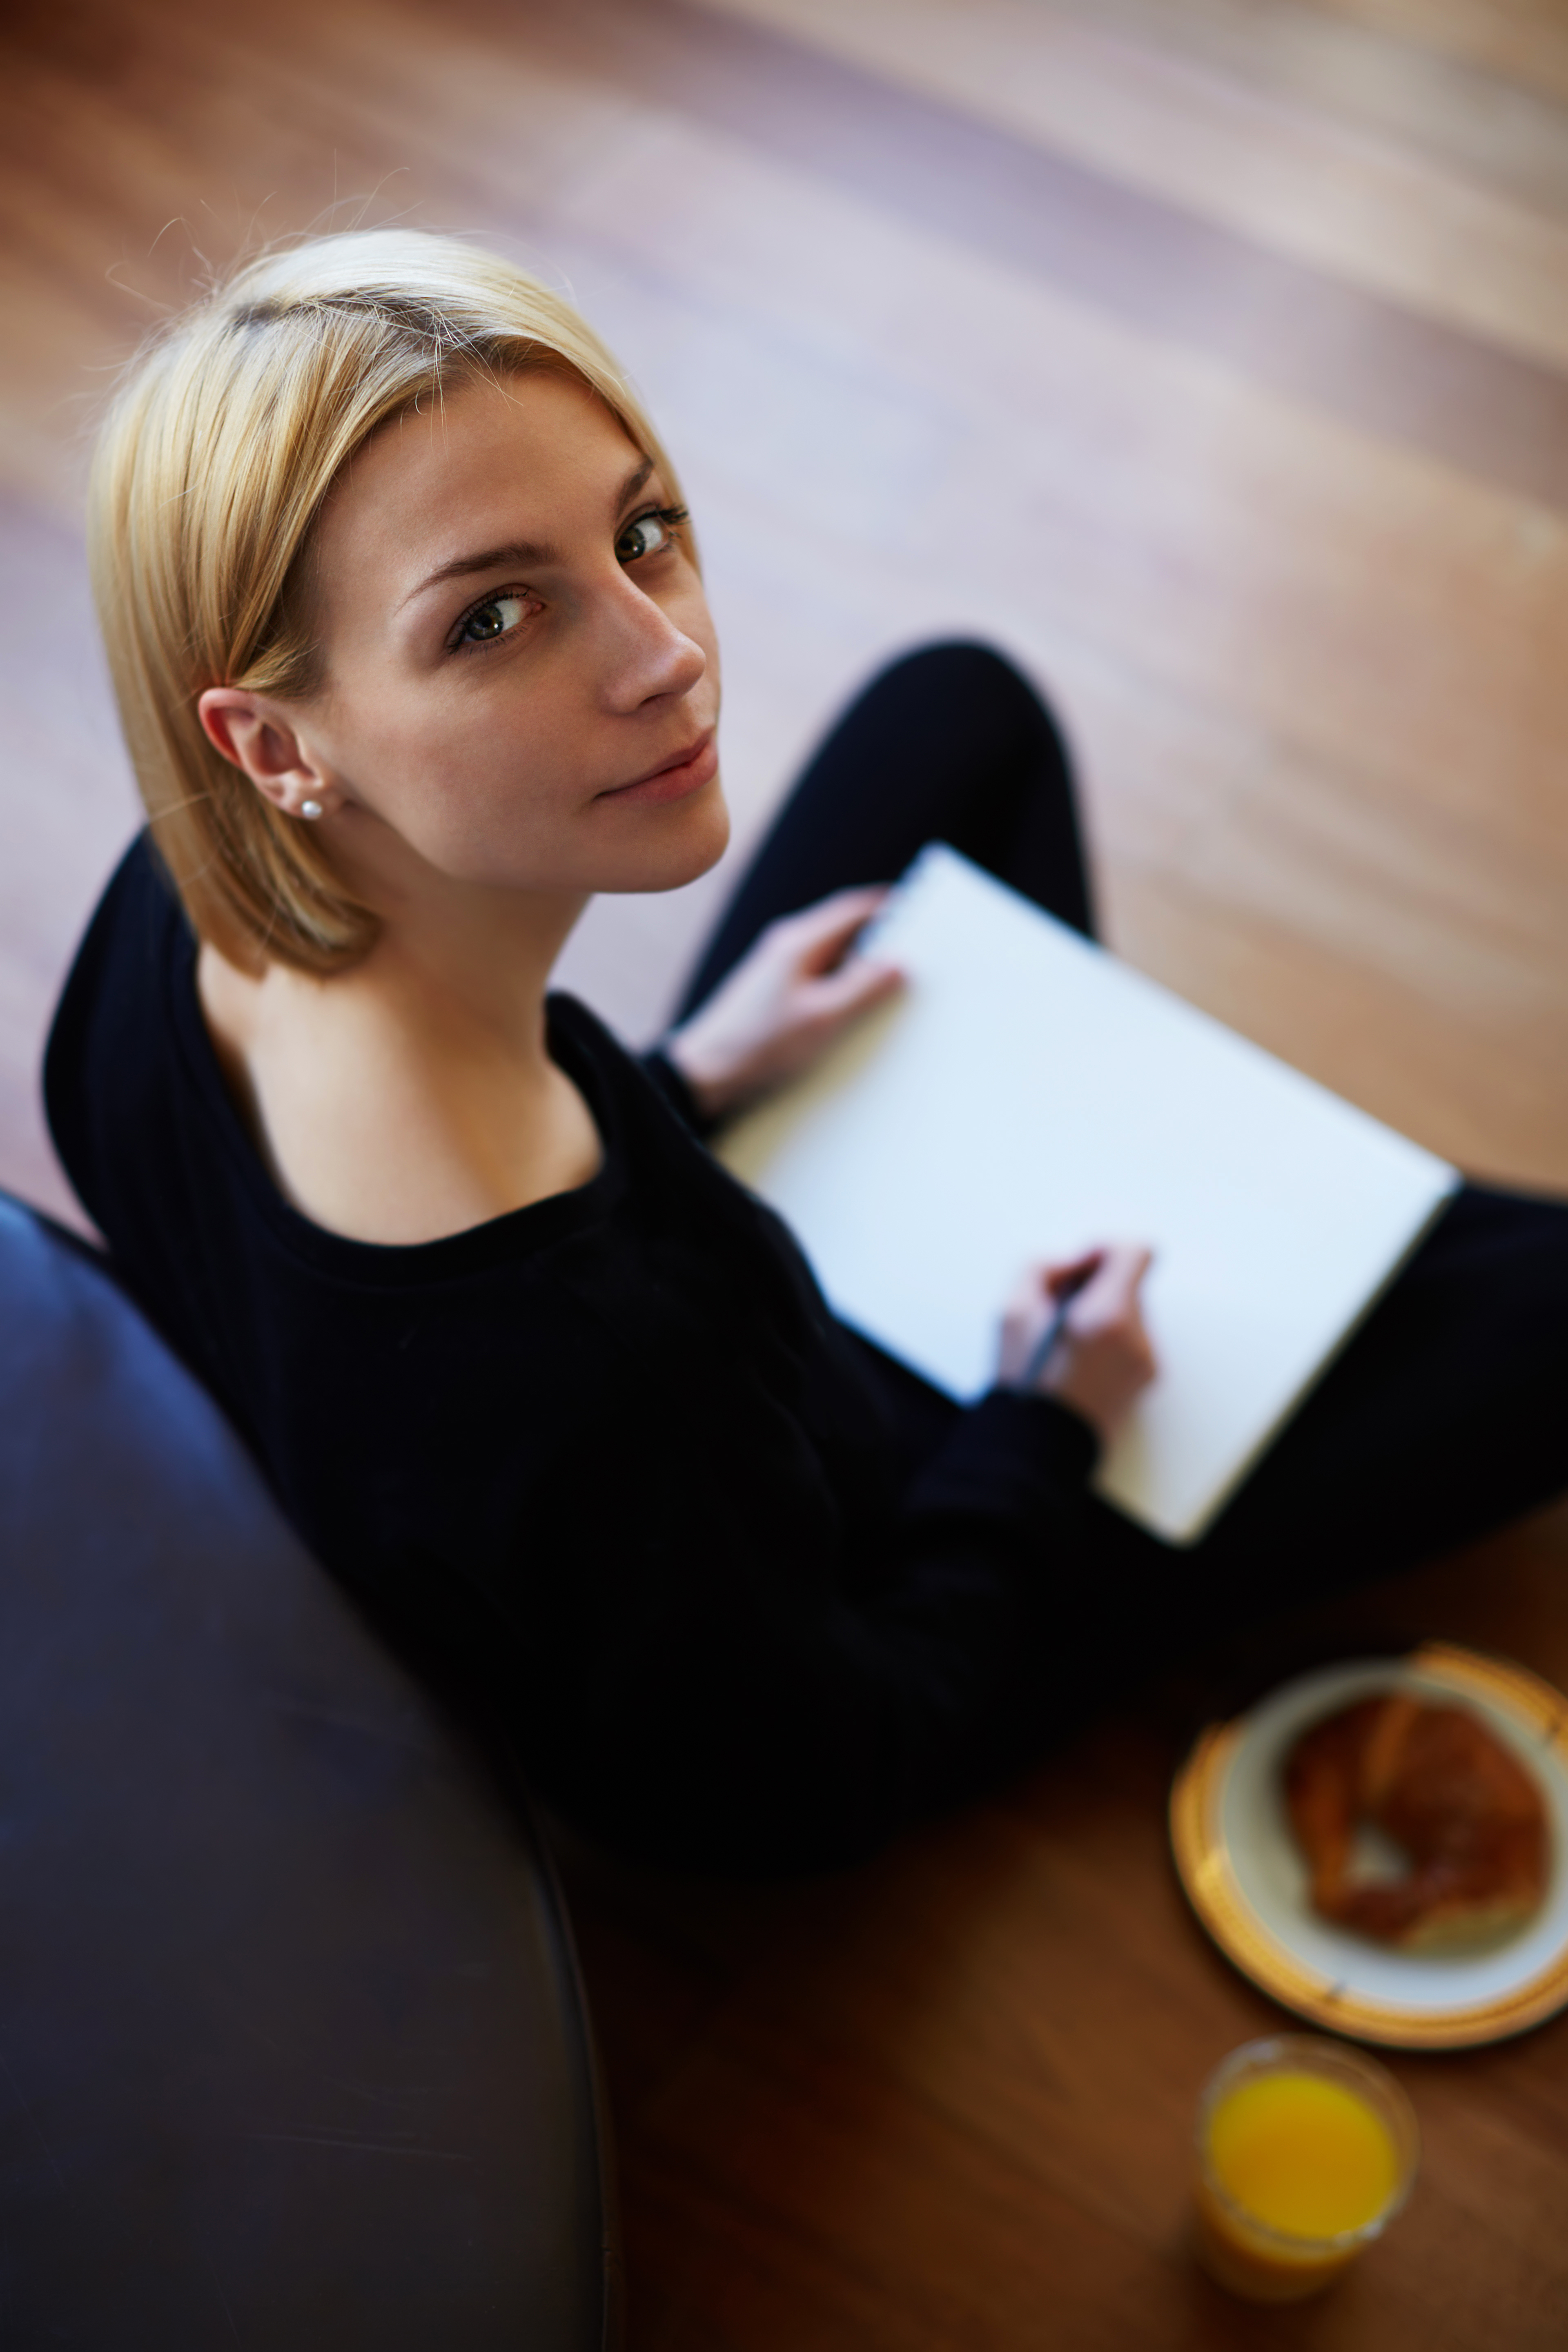 Top view shot of blonde hair young woman drawing on the paper while sitting on the floor of her living room | Source: Shutterstock.com